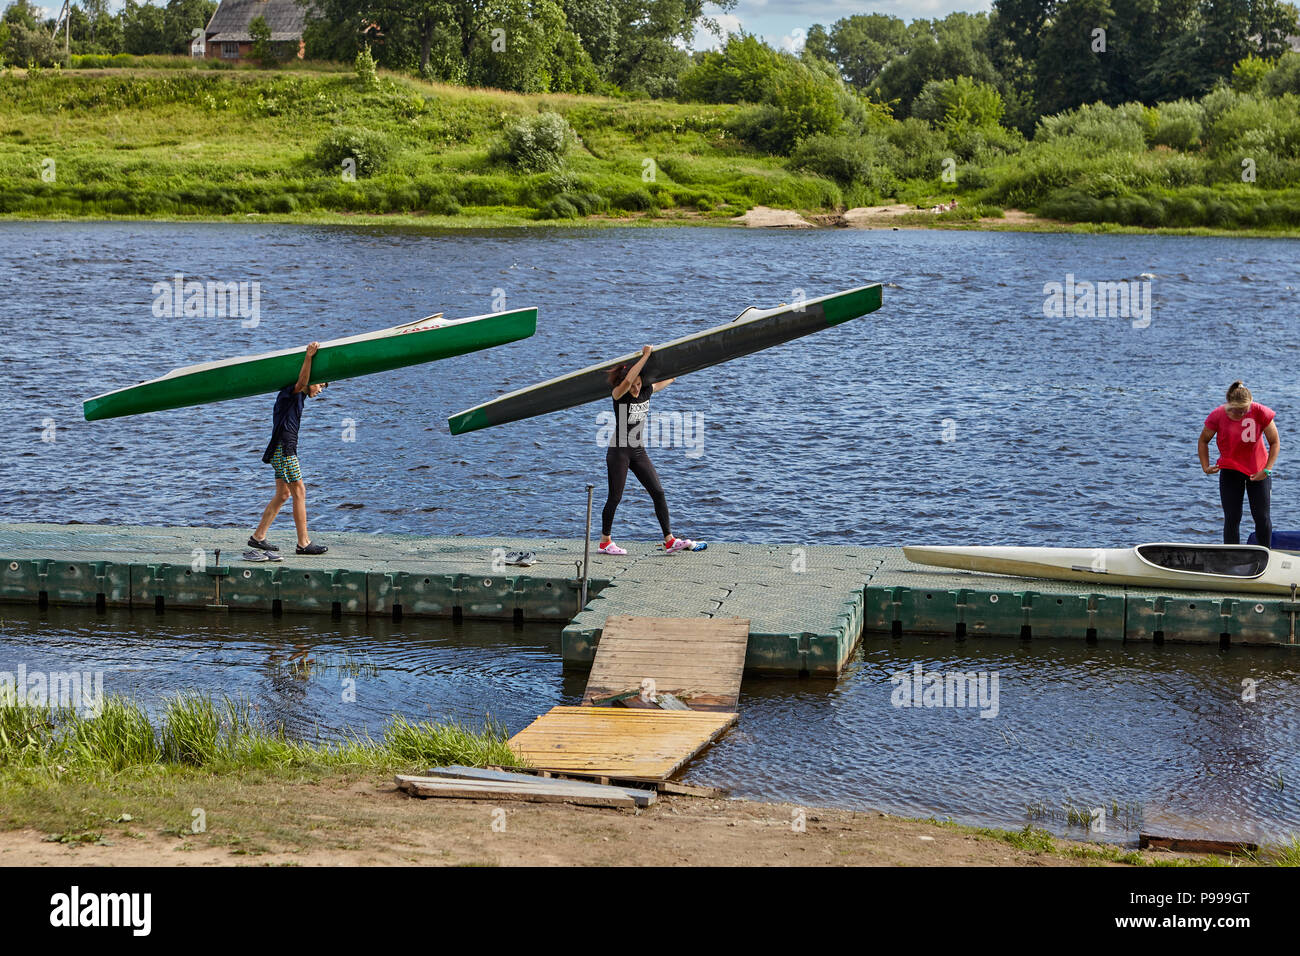 Polotsk, Belarus - July 6, 2018: Young sportsmen finished training in rowing on kayaks and canoes that took place on river Zapadnaya Dvina. Stock Photo